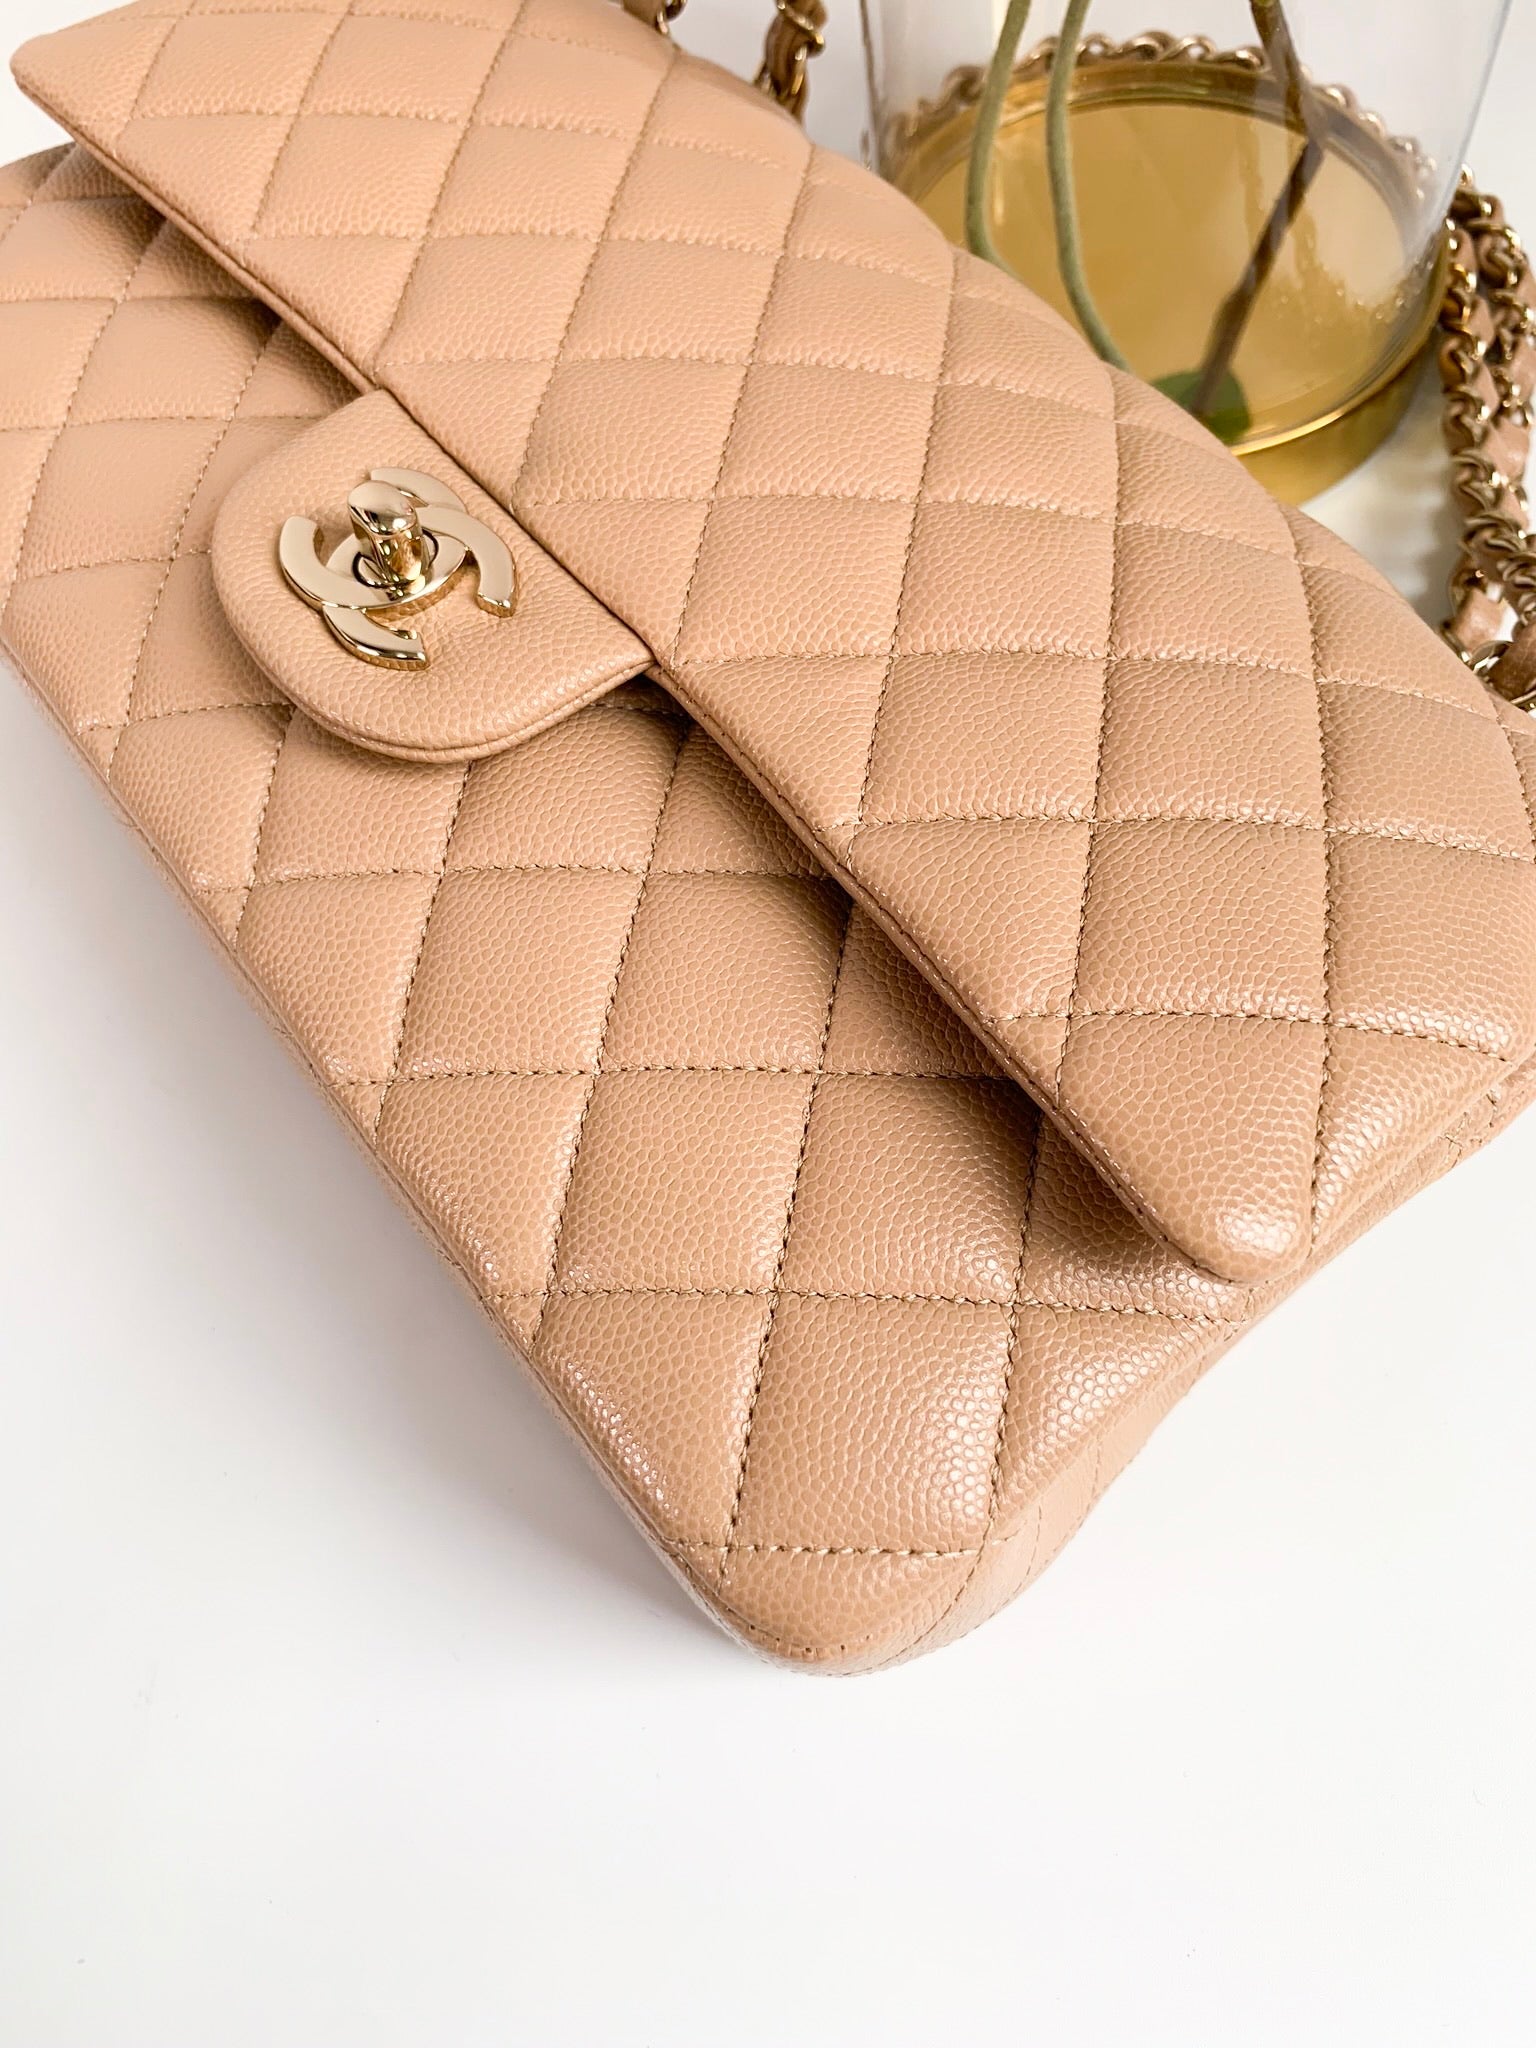 CHANEL Caviar Quilted Medium Double Flap Light Beige 1224832